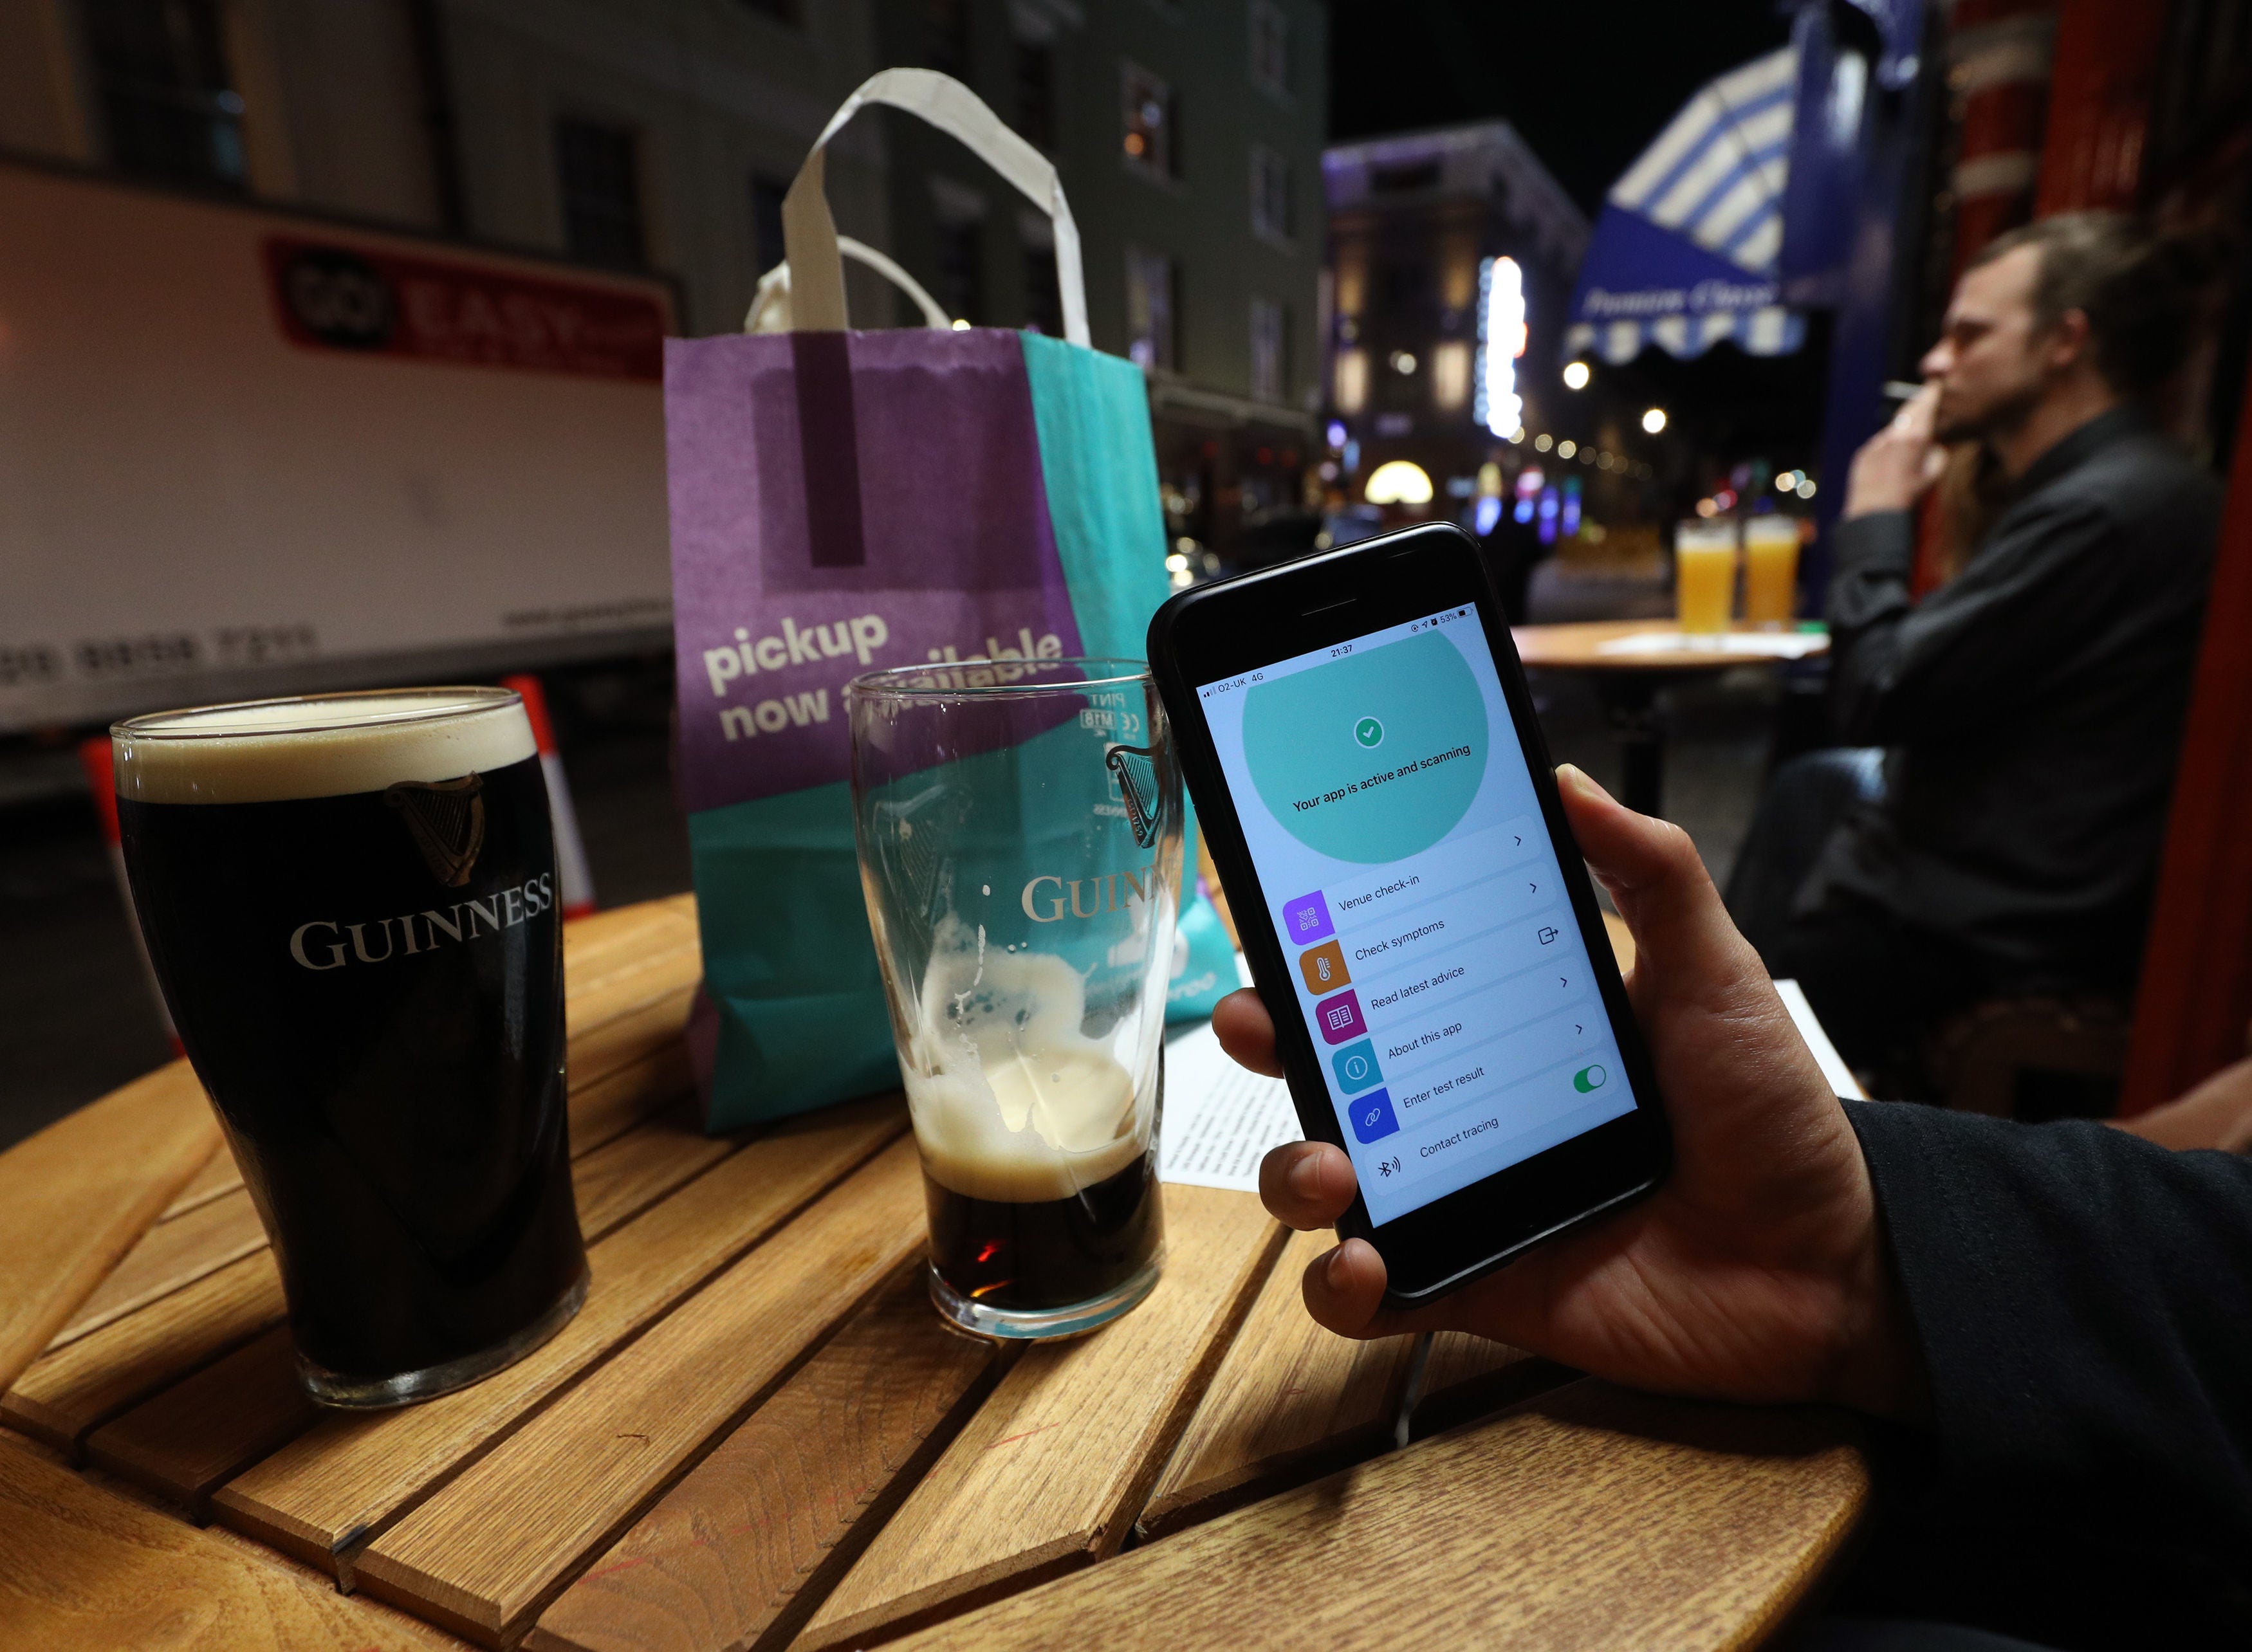 A person uses the NHS coronavirus contact tracing app outside The Coach and Horses pub in Soho, central London